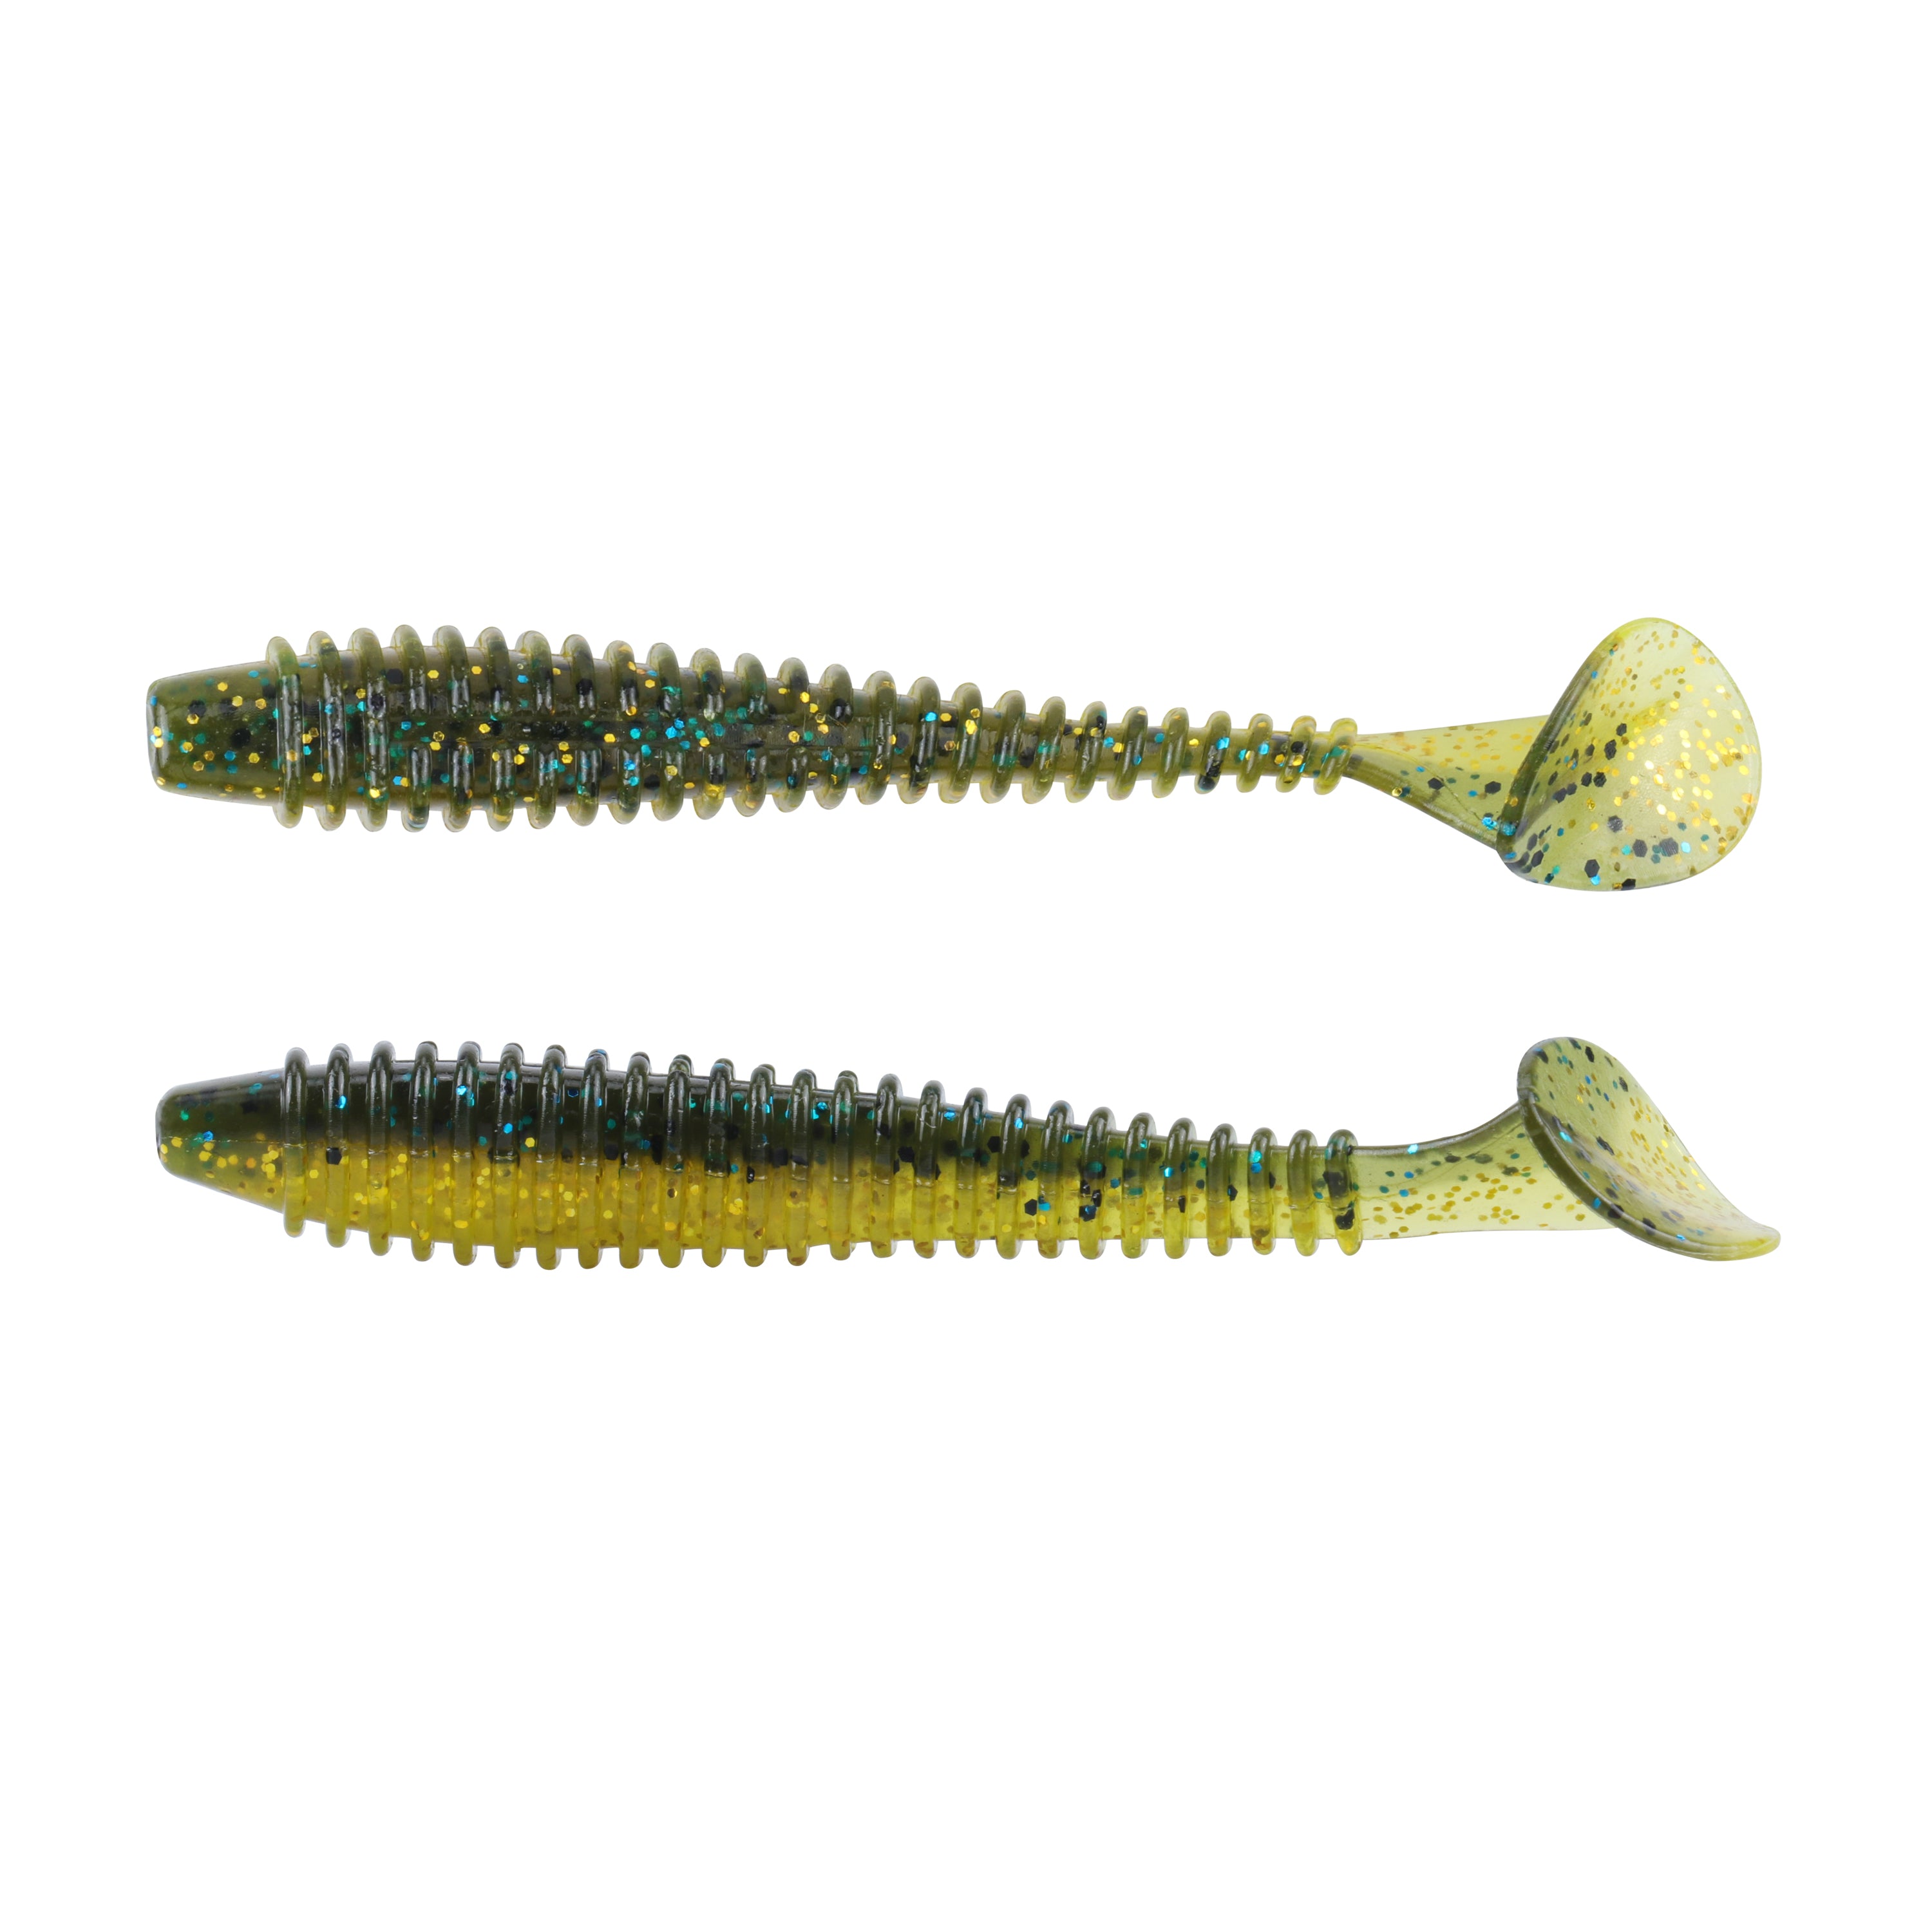 RUNCL ProBite Paddle Tail Swimbaits Black Gold, Soft Fishing Lures -  Natural Oils, Ribbed Design, Paddle Tail, Hook Slot, Proven Colors - Bass  Fishing Lures Baits 03 (2in, Pack of 40), Soft